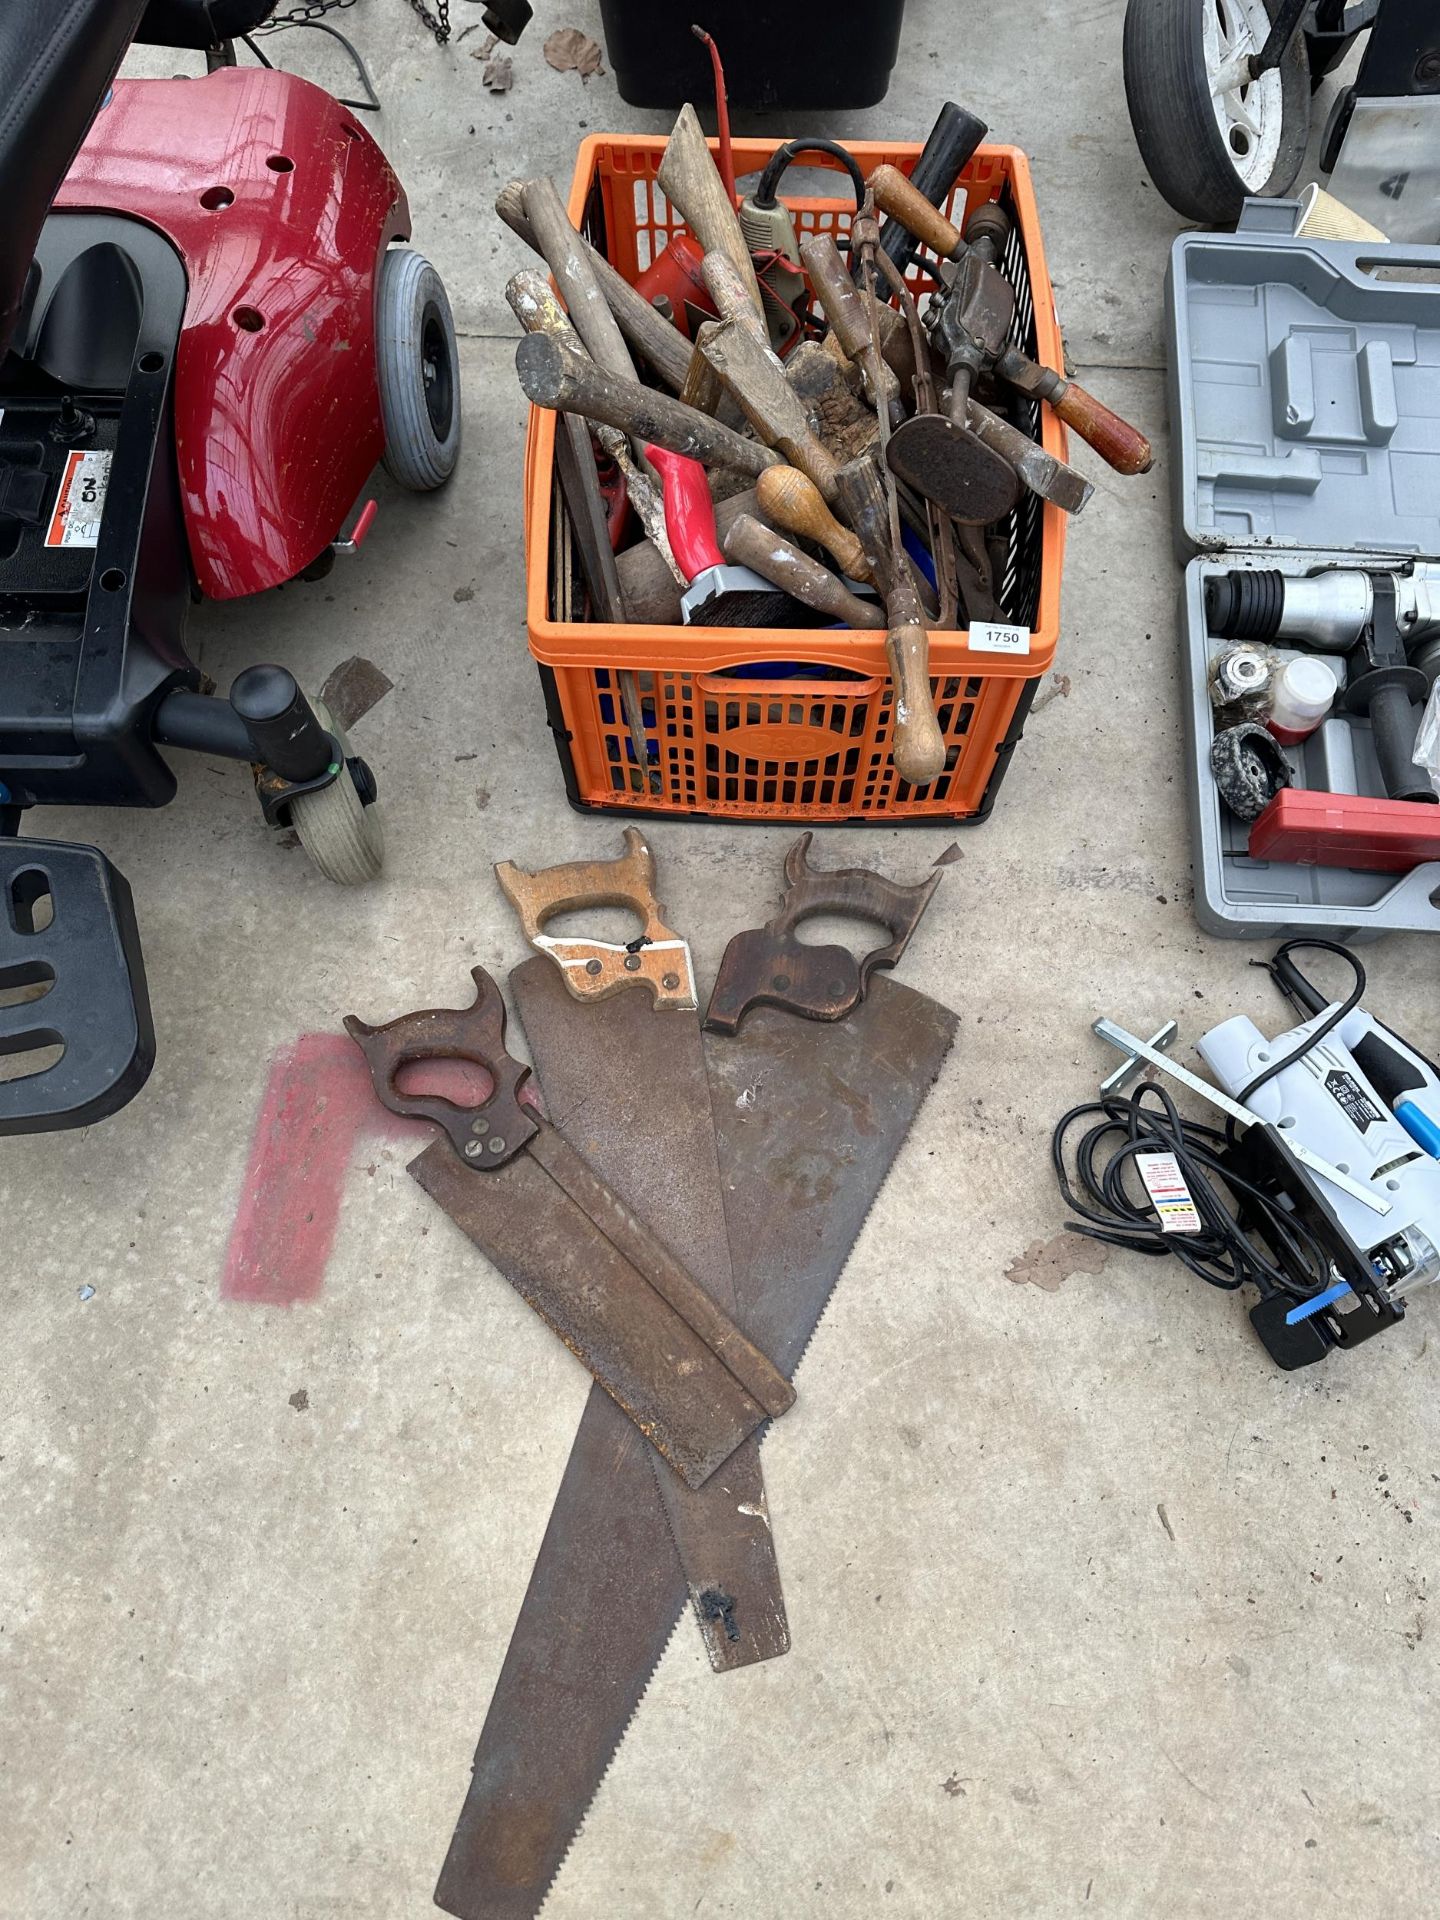 AN ASSORTMENT OF VINTAGE HANDTOOLS TO INCLUDE A BRACE DRILL, SAWS AND HAMMERS ETC